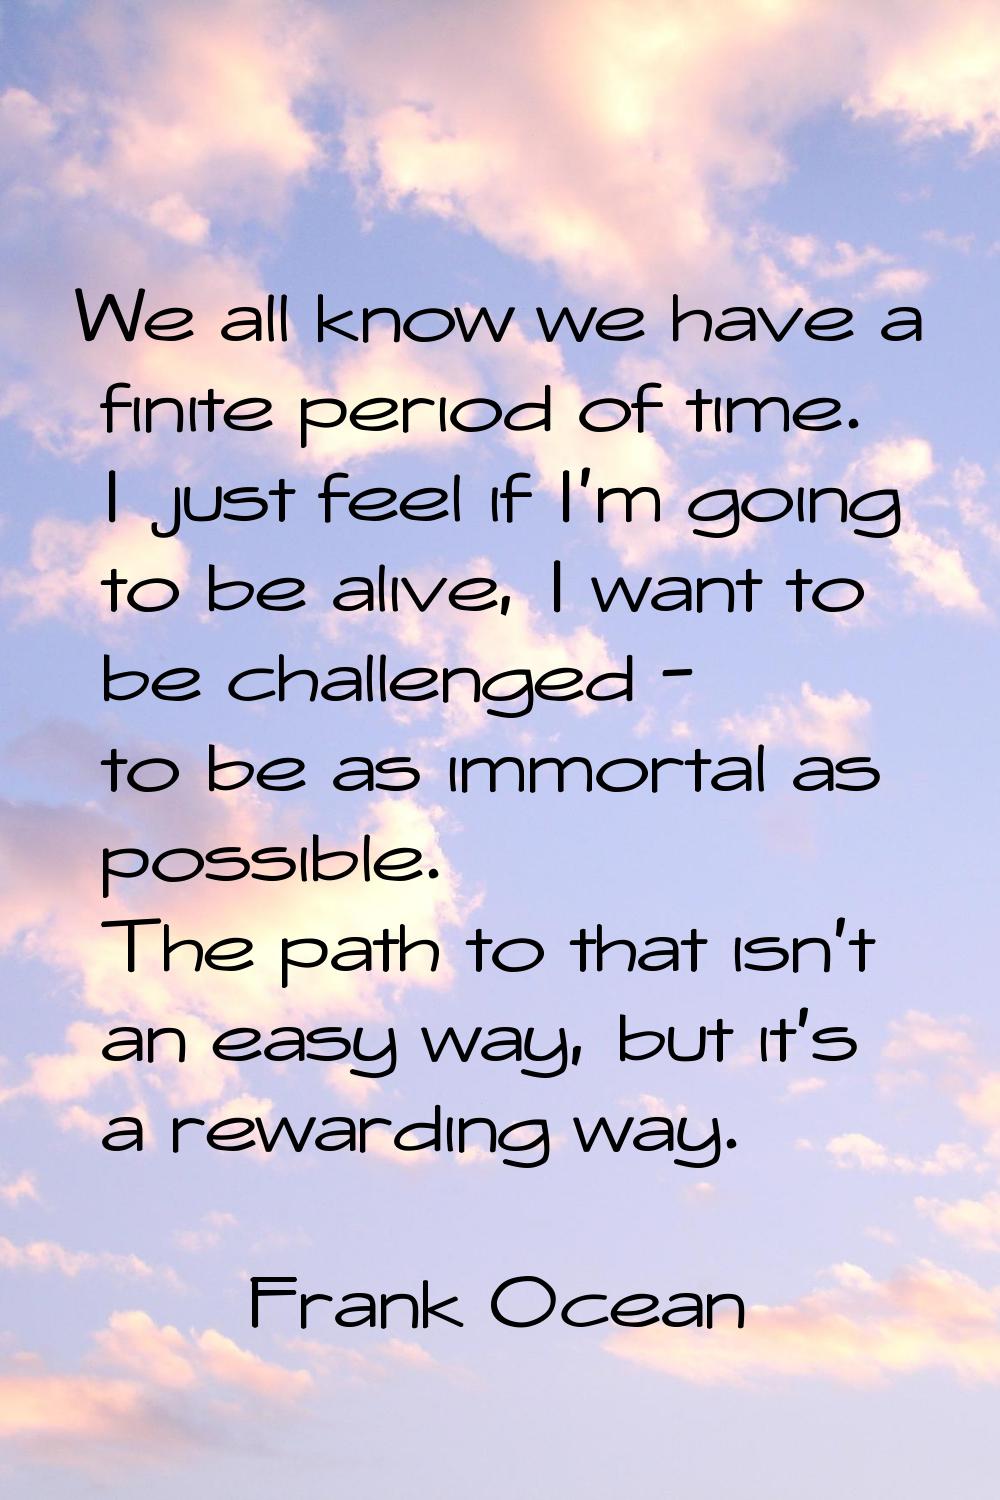 We all know we have a finite period of time. I just feel if I'm going to be alive, I want to be cha